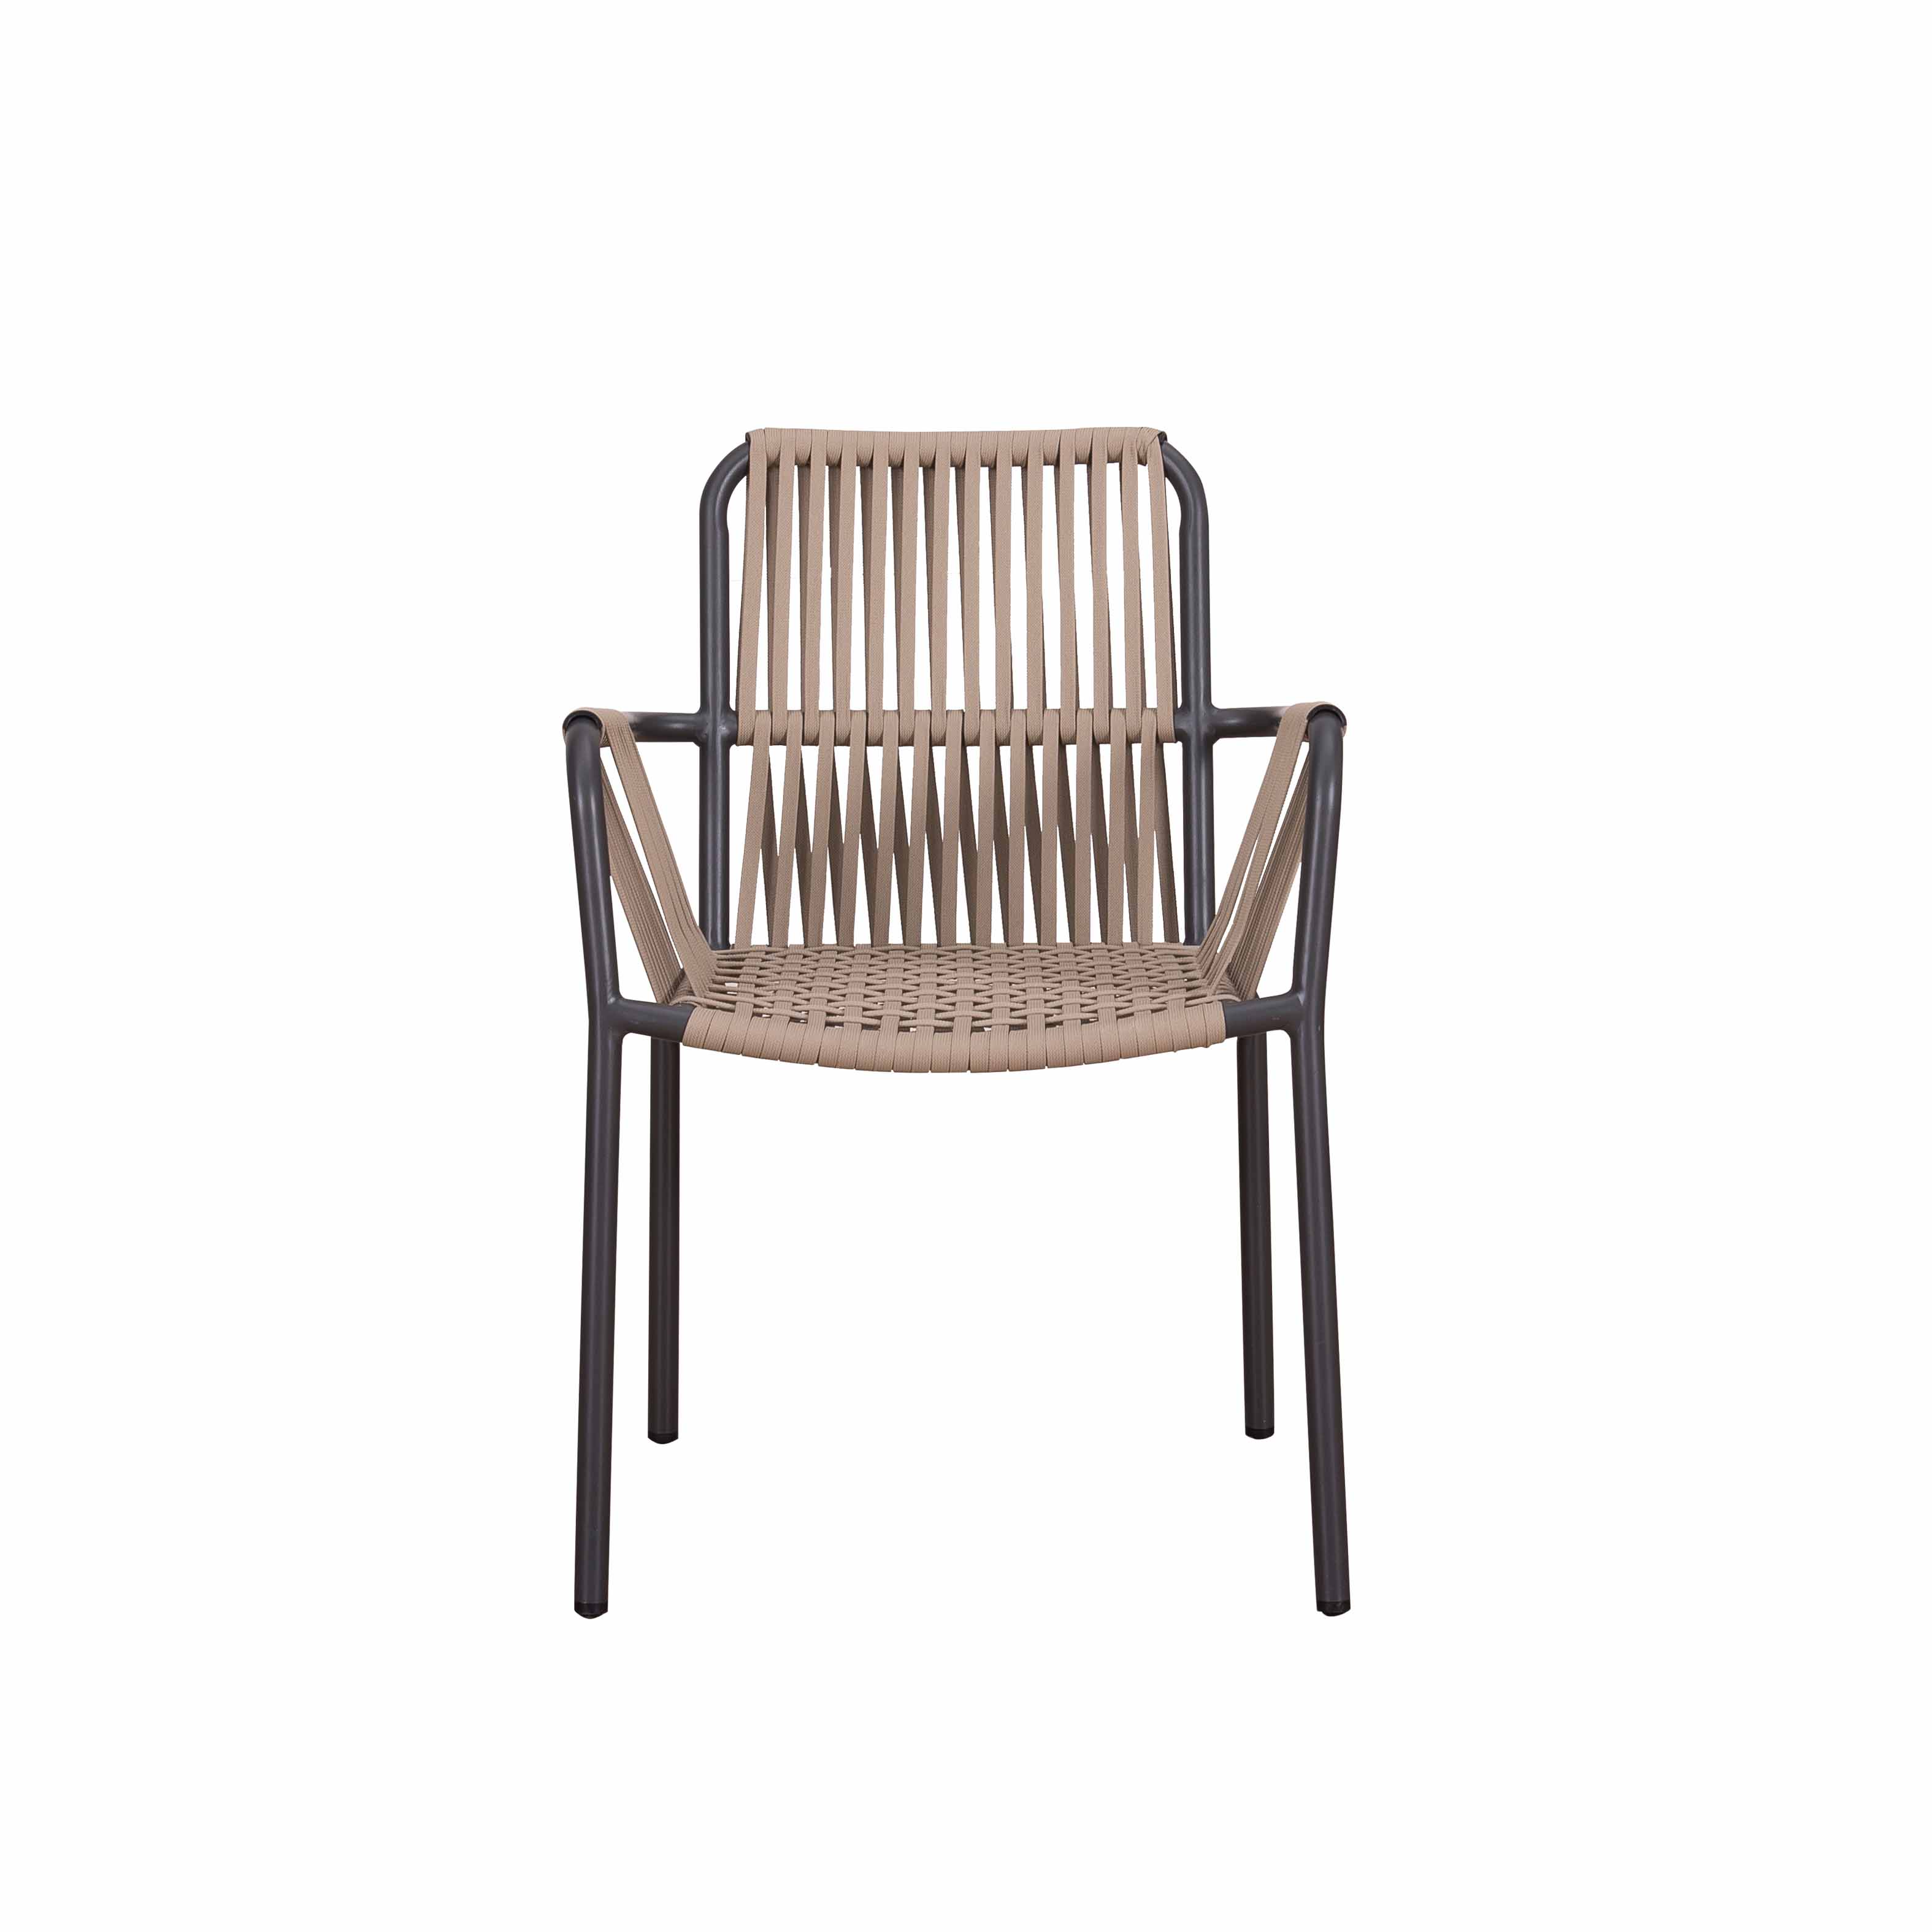 Lincoln tambo chair S8